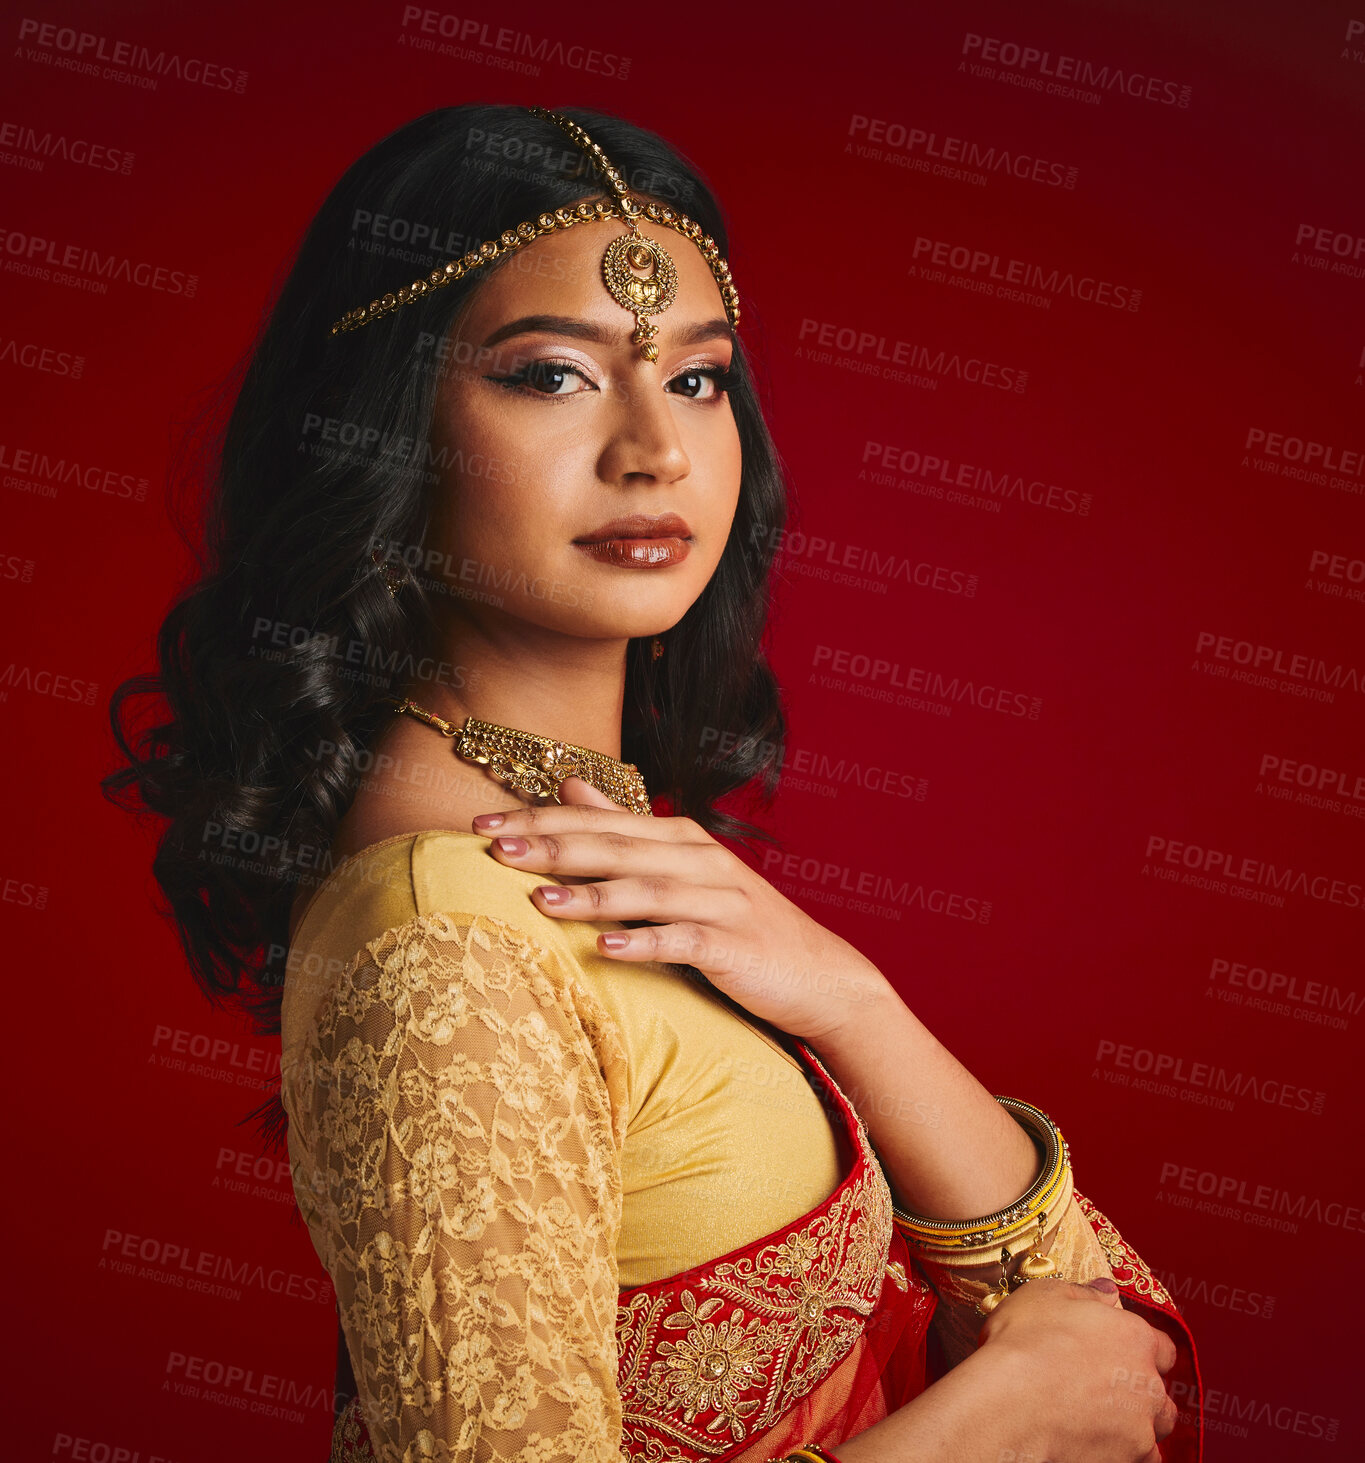 Buy stock photo Fashion, culture and portrait of Indian woman with beauty in traditional clothes, jewellery and sari. Religion, Hindu and face of female person on red background with accessory, cosmetics and makeup